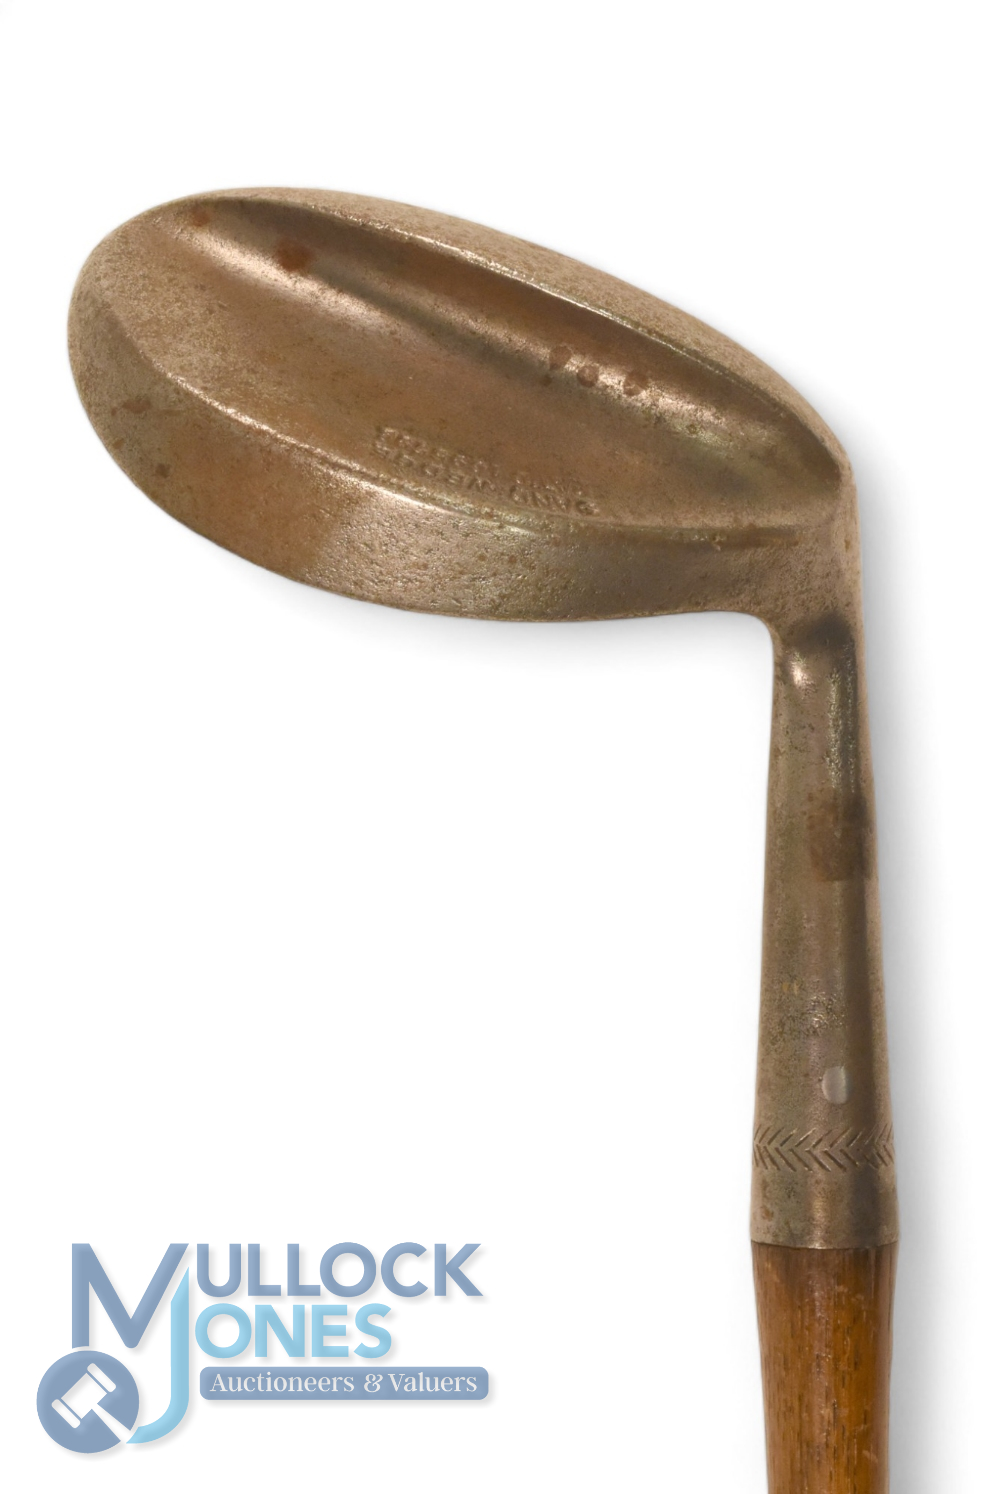 Walter Hagen Patent wide flanged sole sand iron with heavily concaved face with full length grip